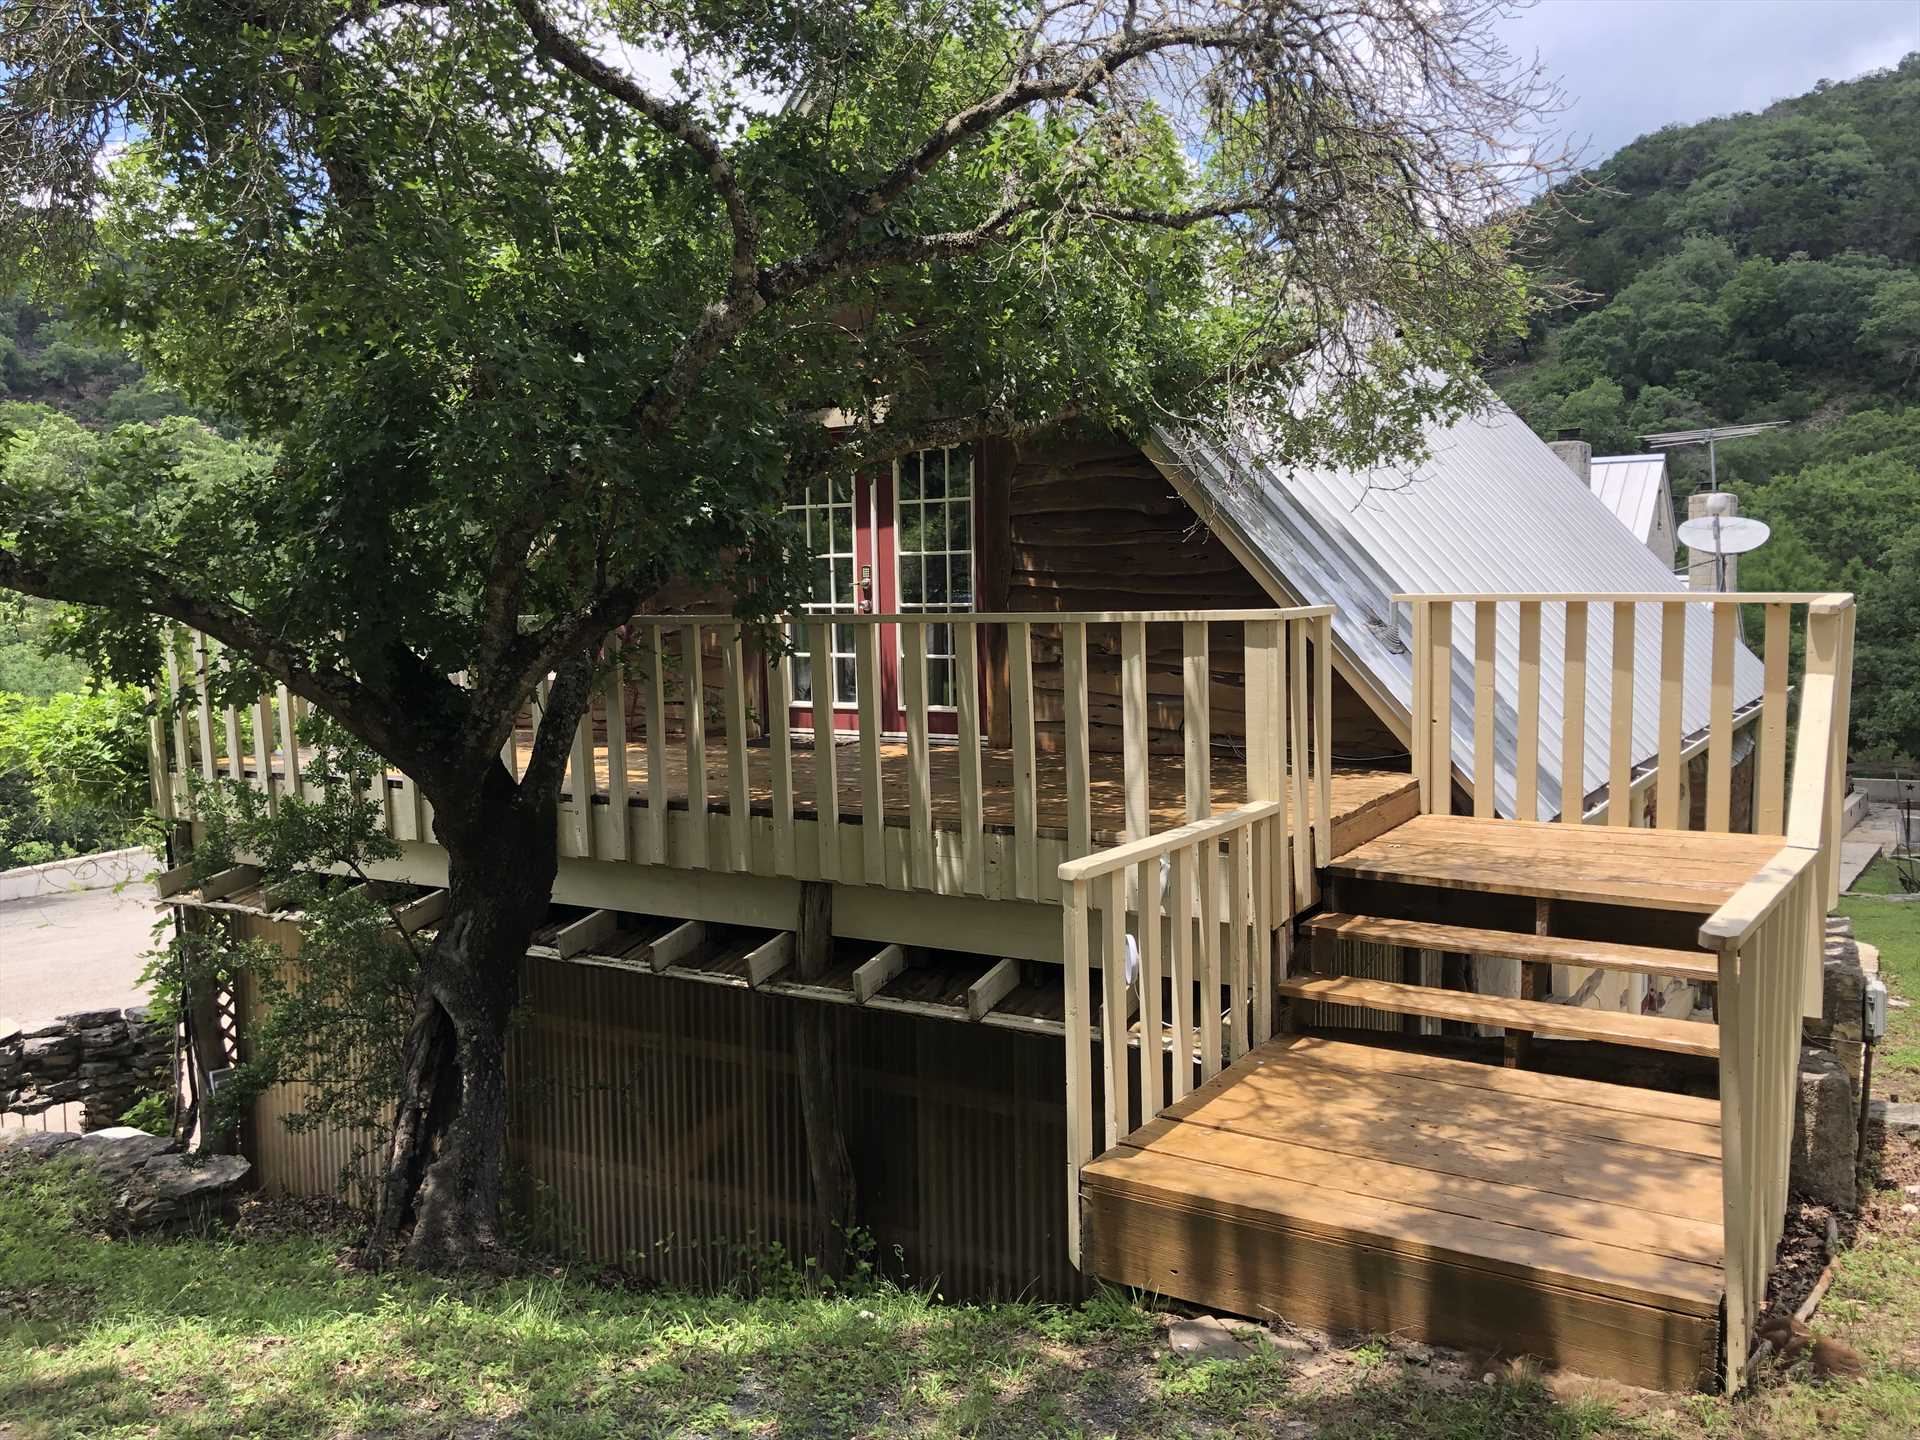                                                 Awaken your inner child with a stay at the fun and scenic Tree House Cabin!